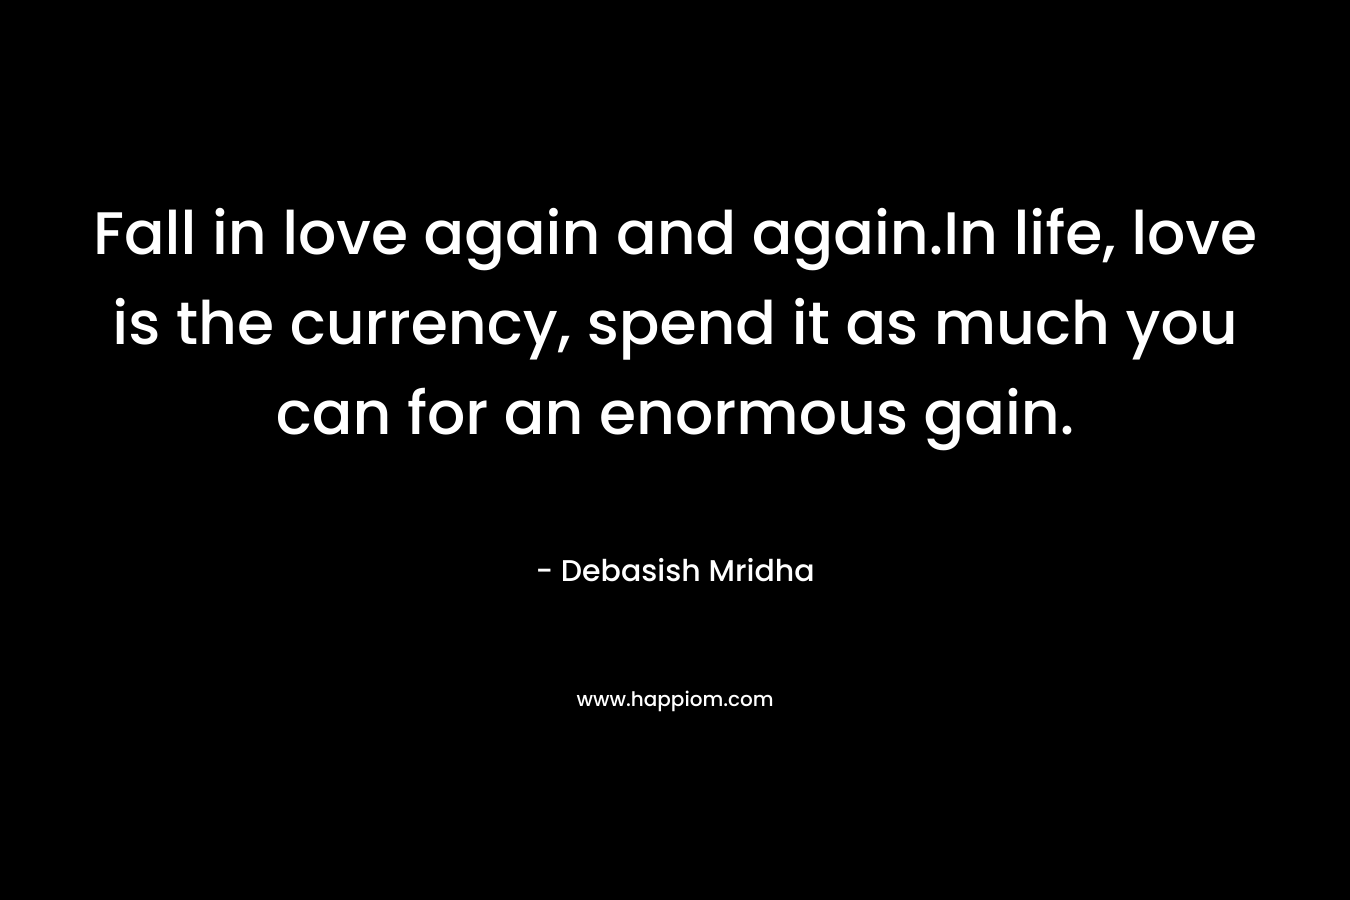 Fall in love again and again.In life, love is the currency, spend it as much you can for an enormous gain. – Debasish Mridha